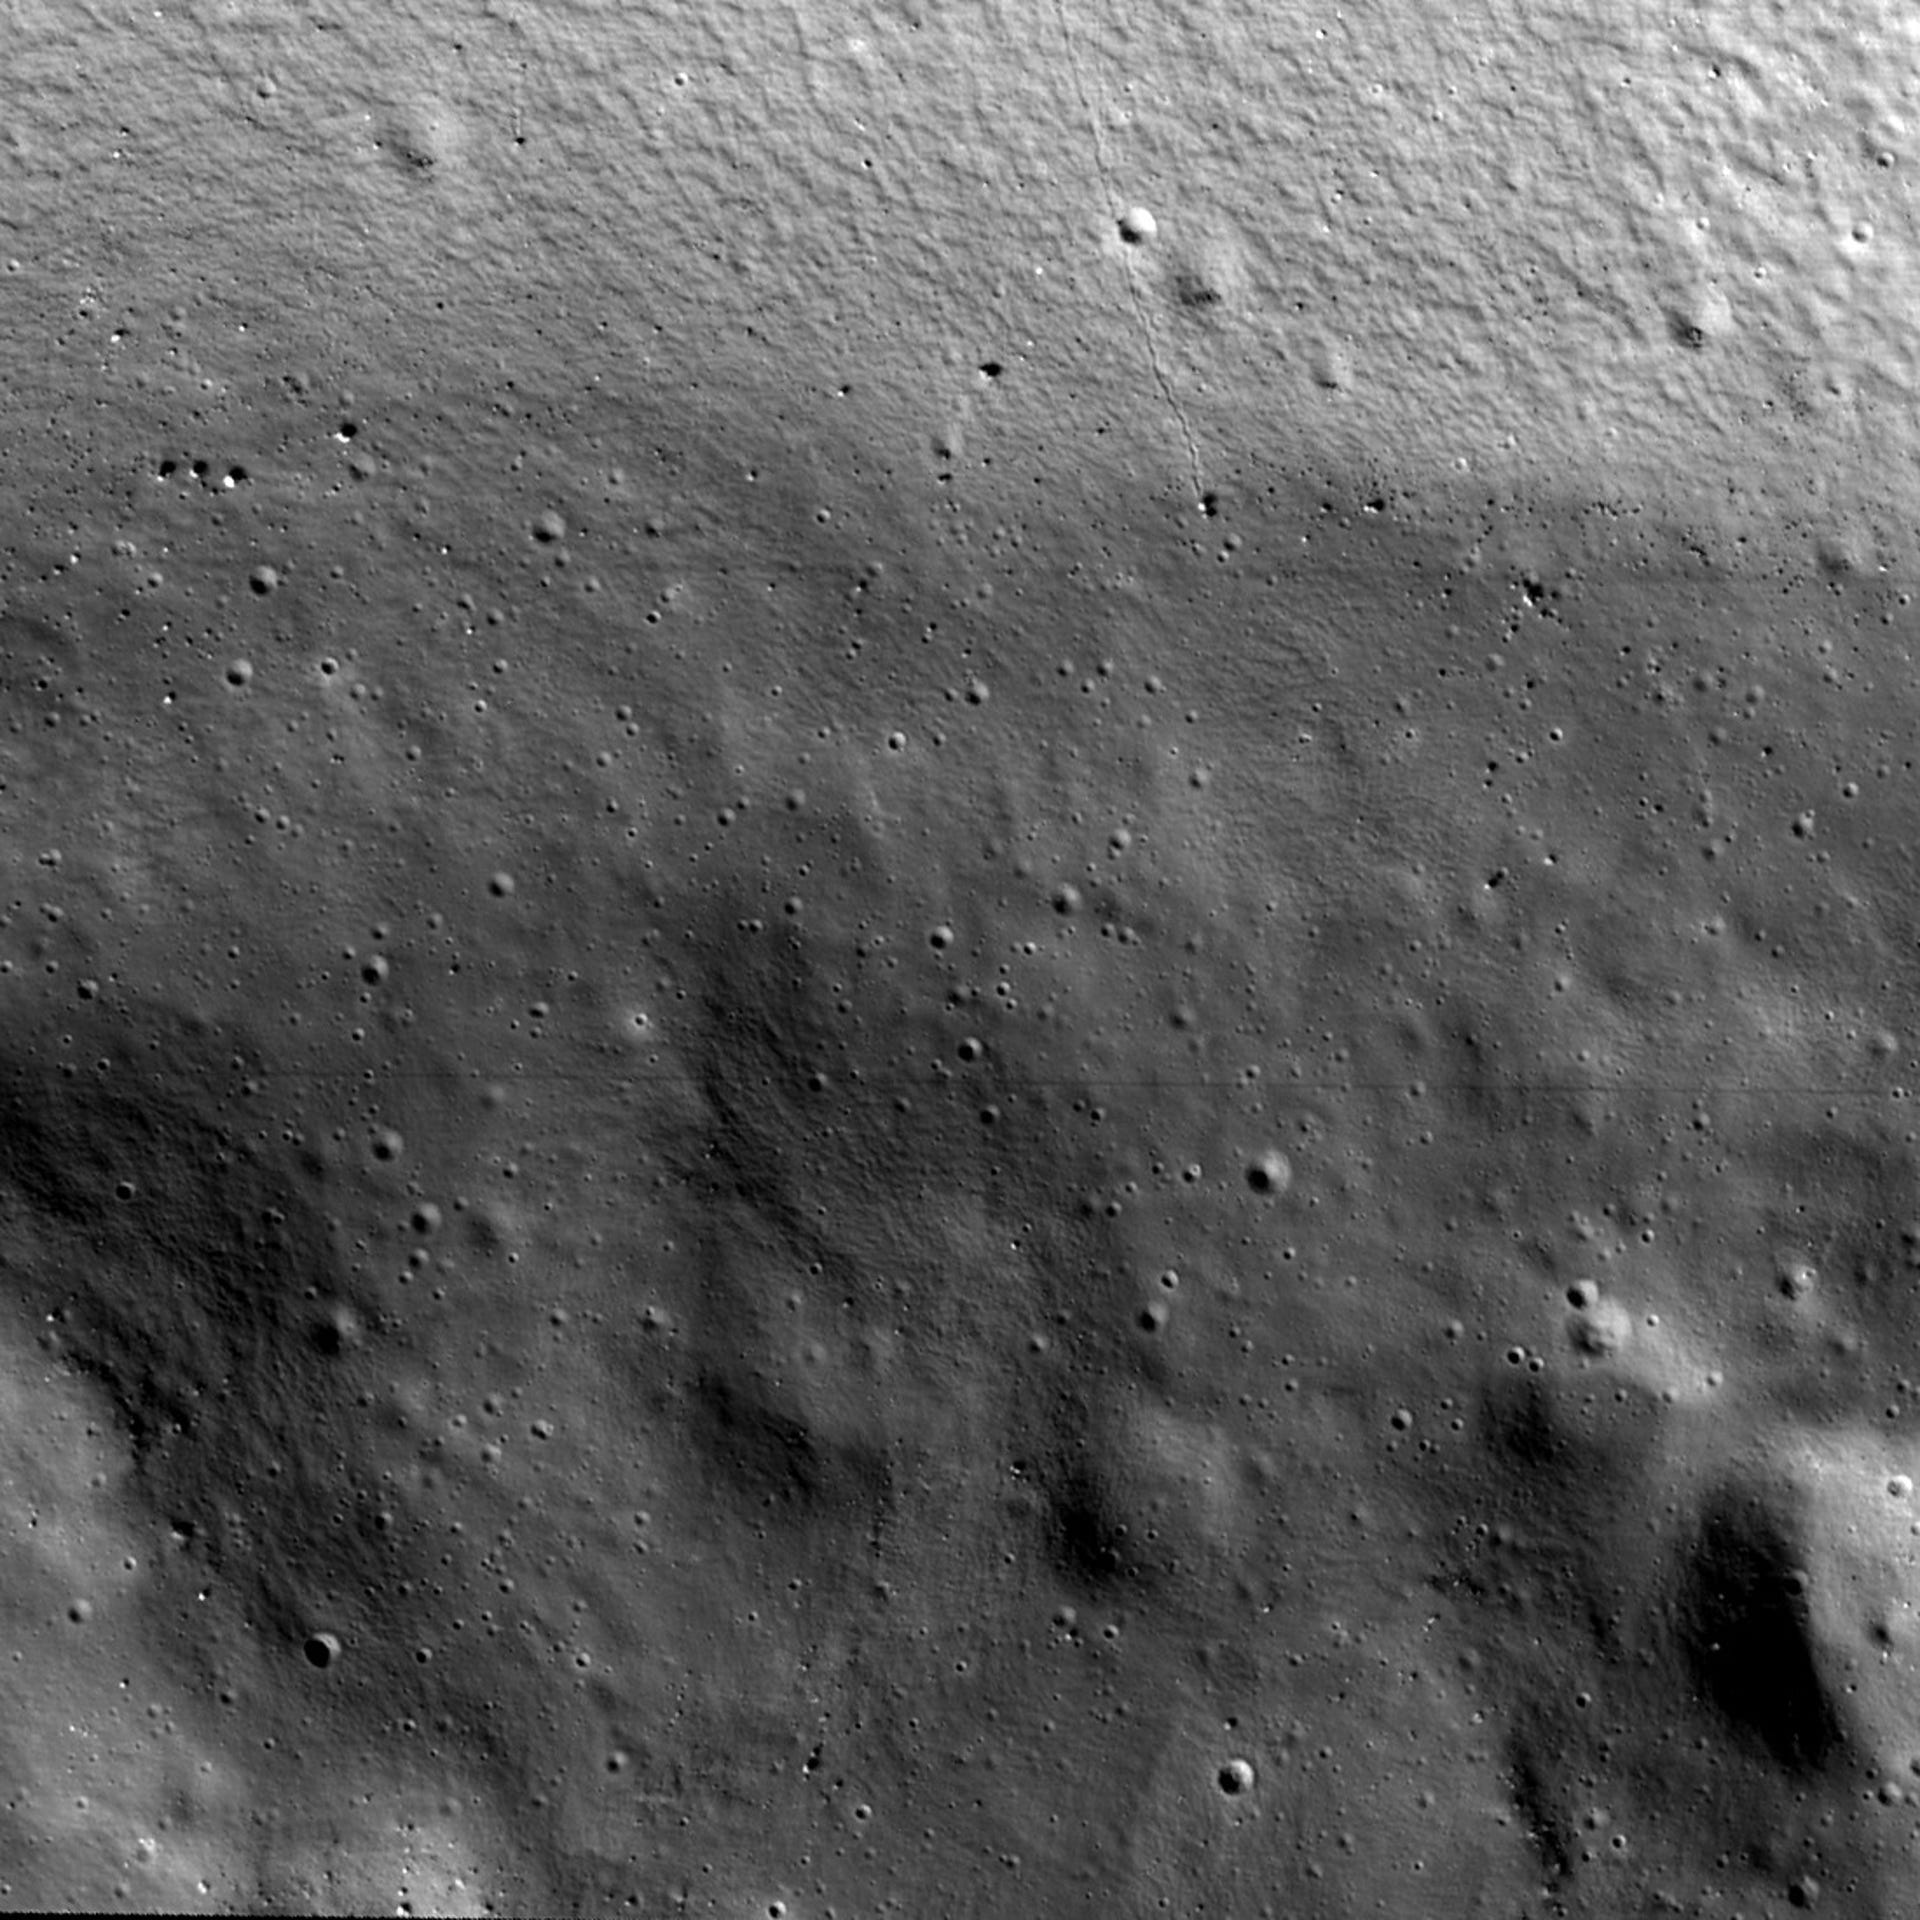 Square black and white view into Shackleton crater on the moon reveals boulders and pockmarks.